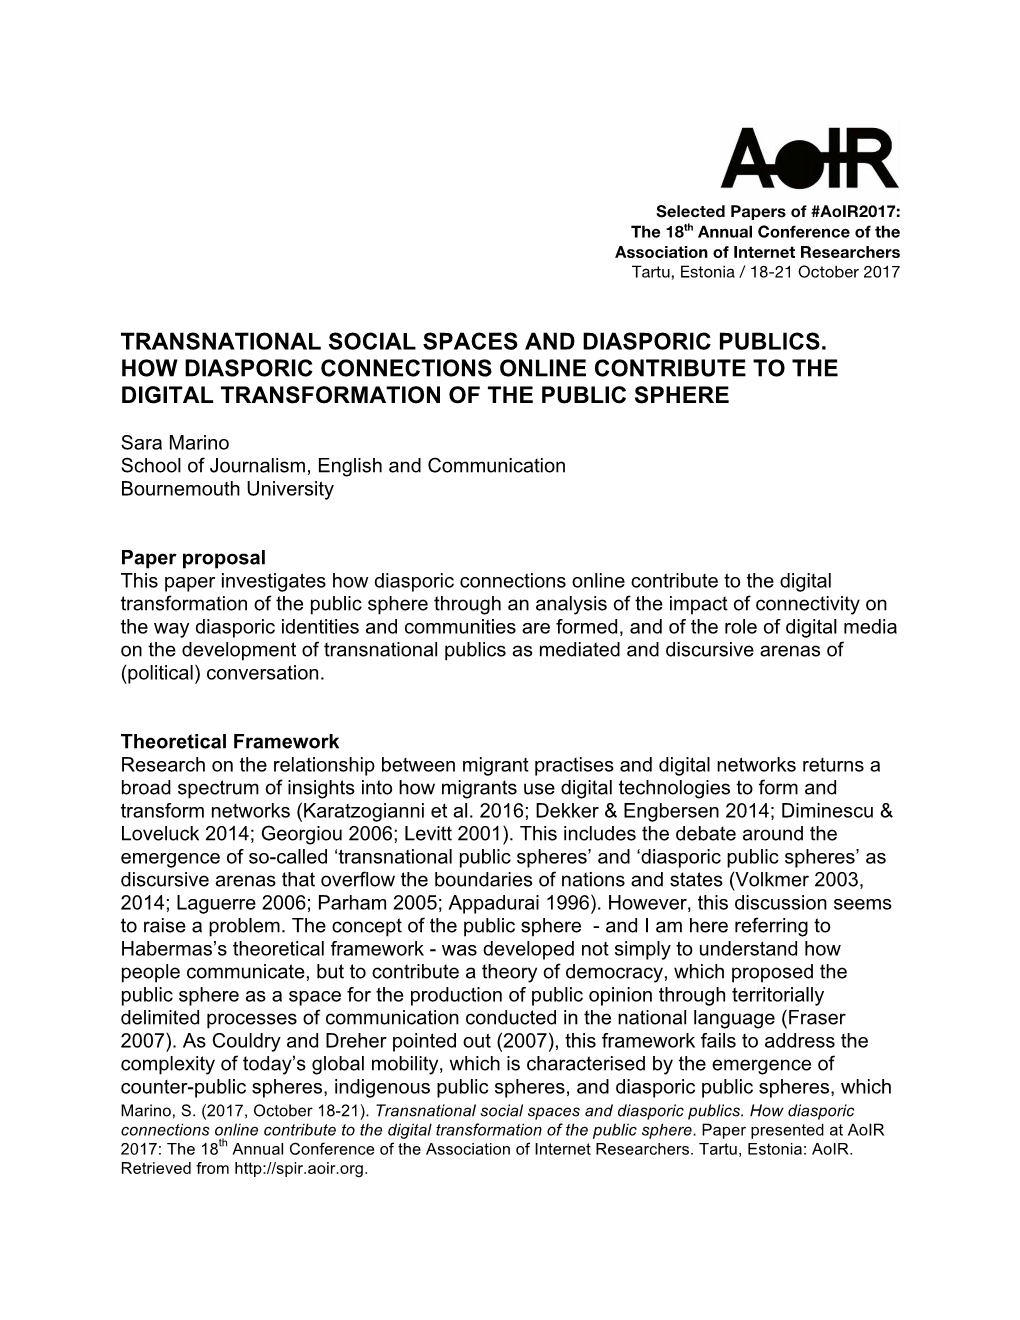 Transnational Social Spaces and Diasporic Publics. How Diasporic Connections Online Contribute to the Digital Transformation of the Public Sphere